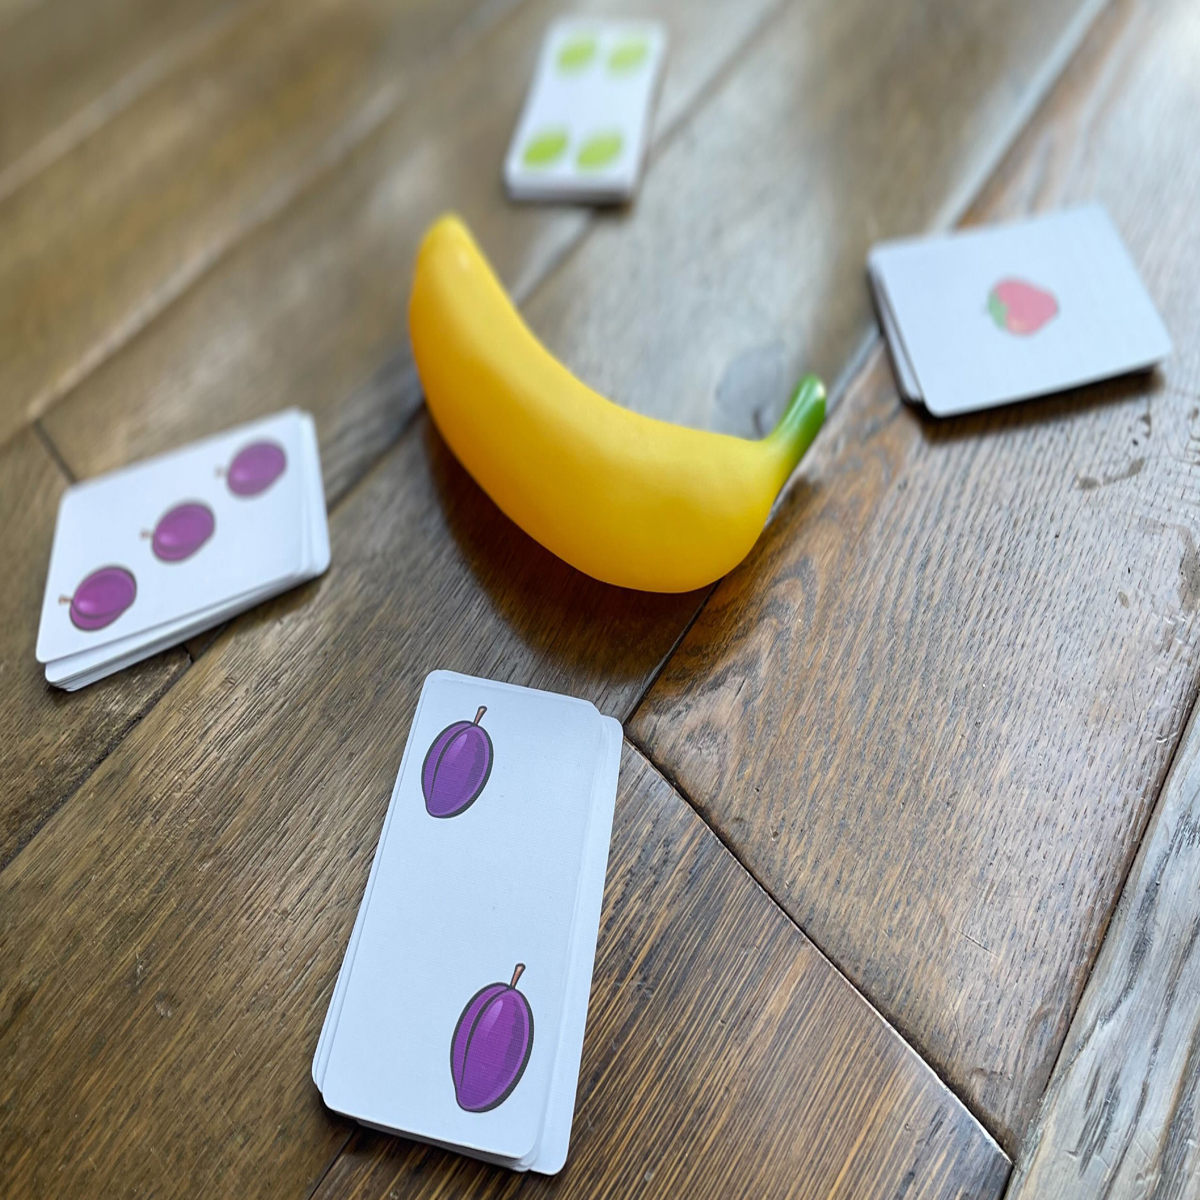 https://assetsio.reedpopcdn.com/fruit-punch-board-game-gameplay.jpg?width=1200&height=1200&fit=crop&quality=100&format=png&enable=upscale&auto=webp